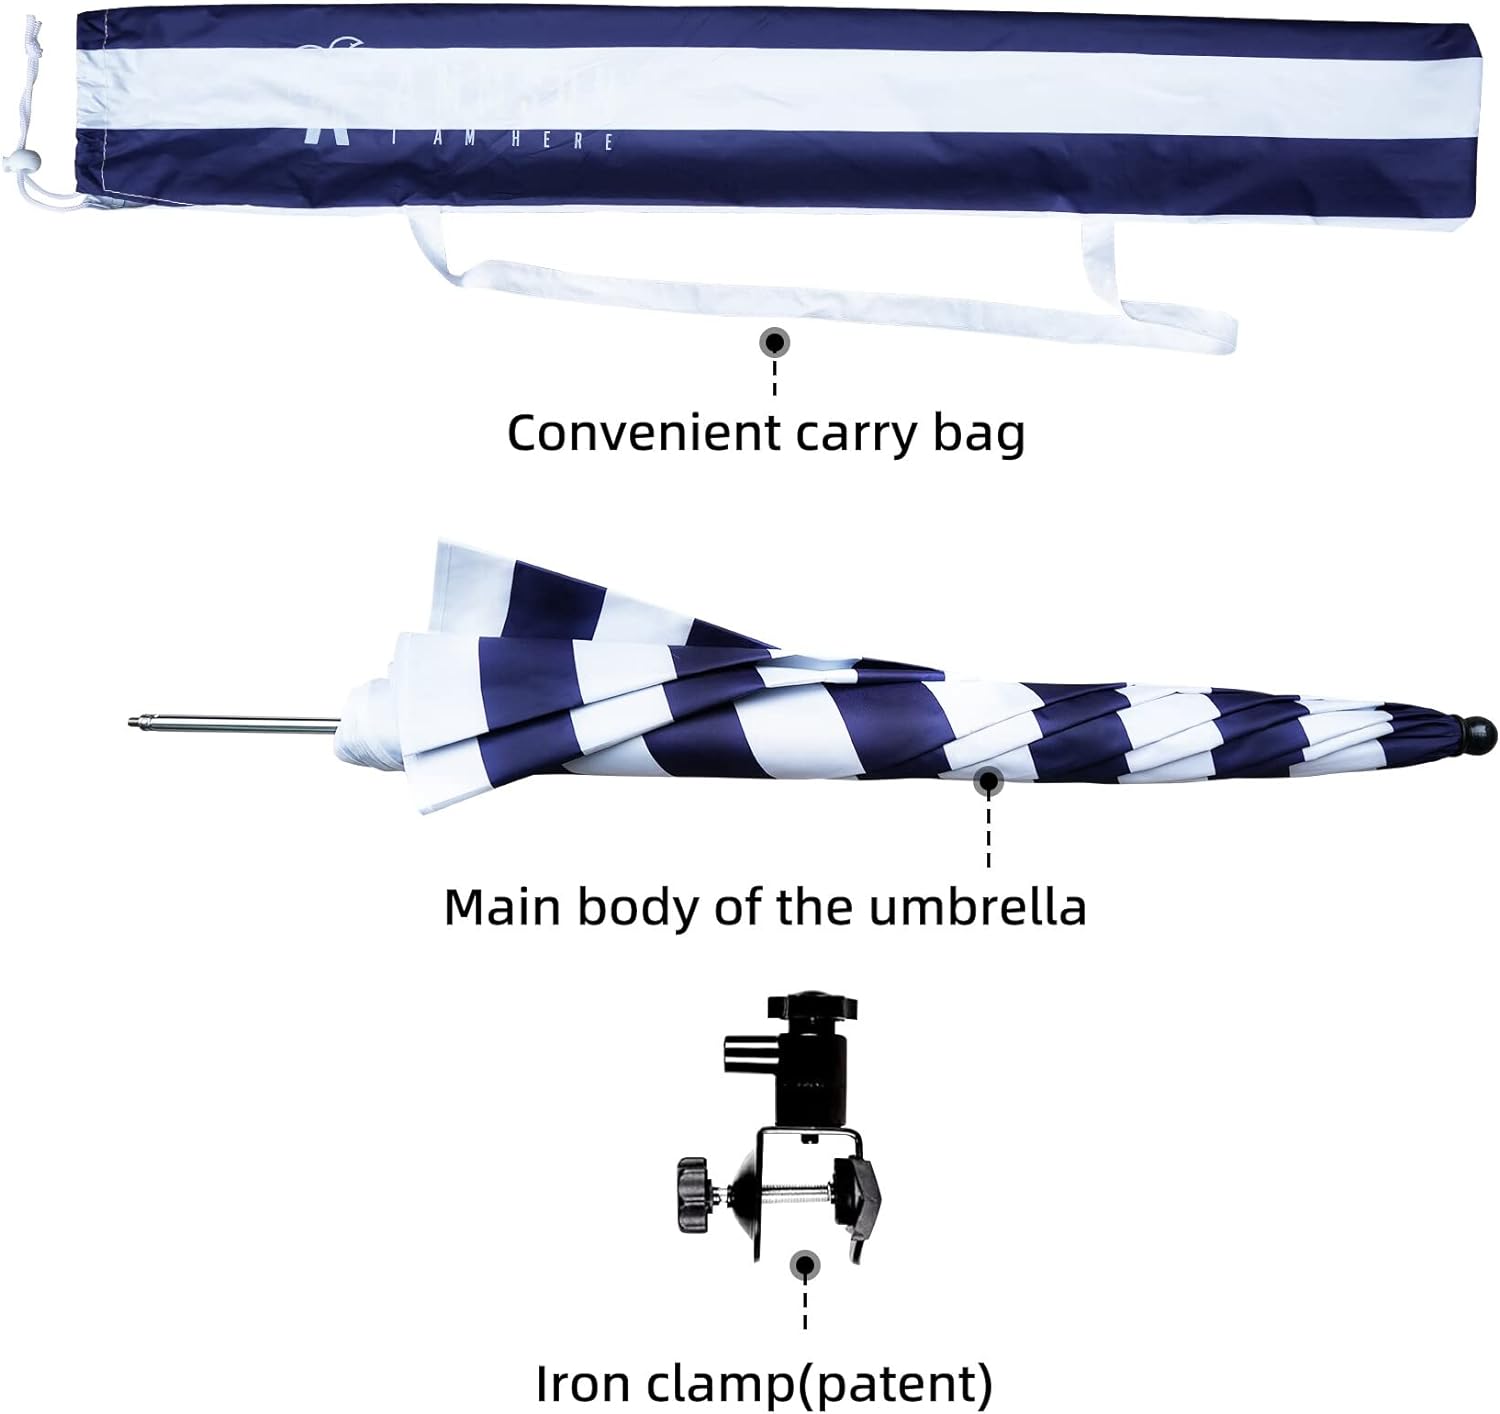 AMMSUN 43 inches Chair Umbrella with Universal Clamp Navy Stripes